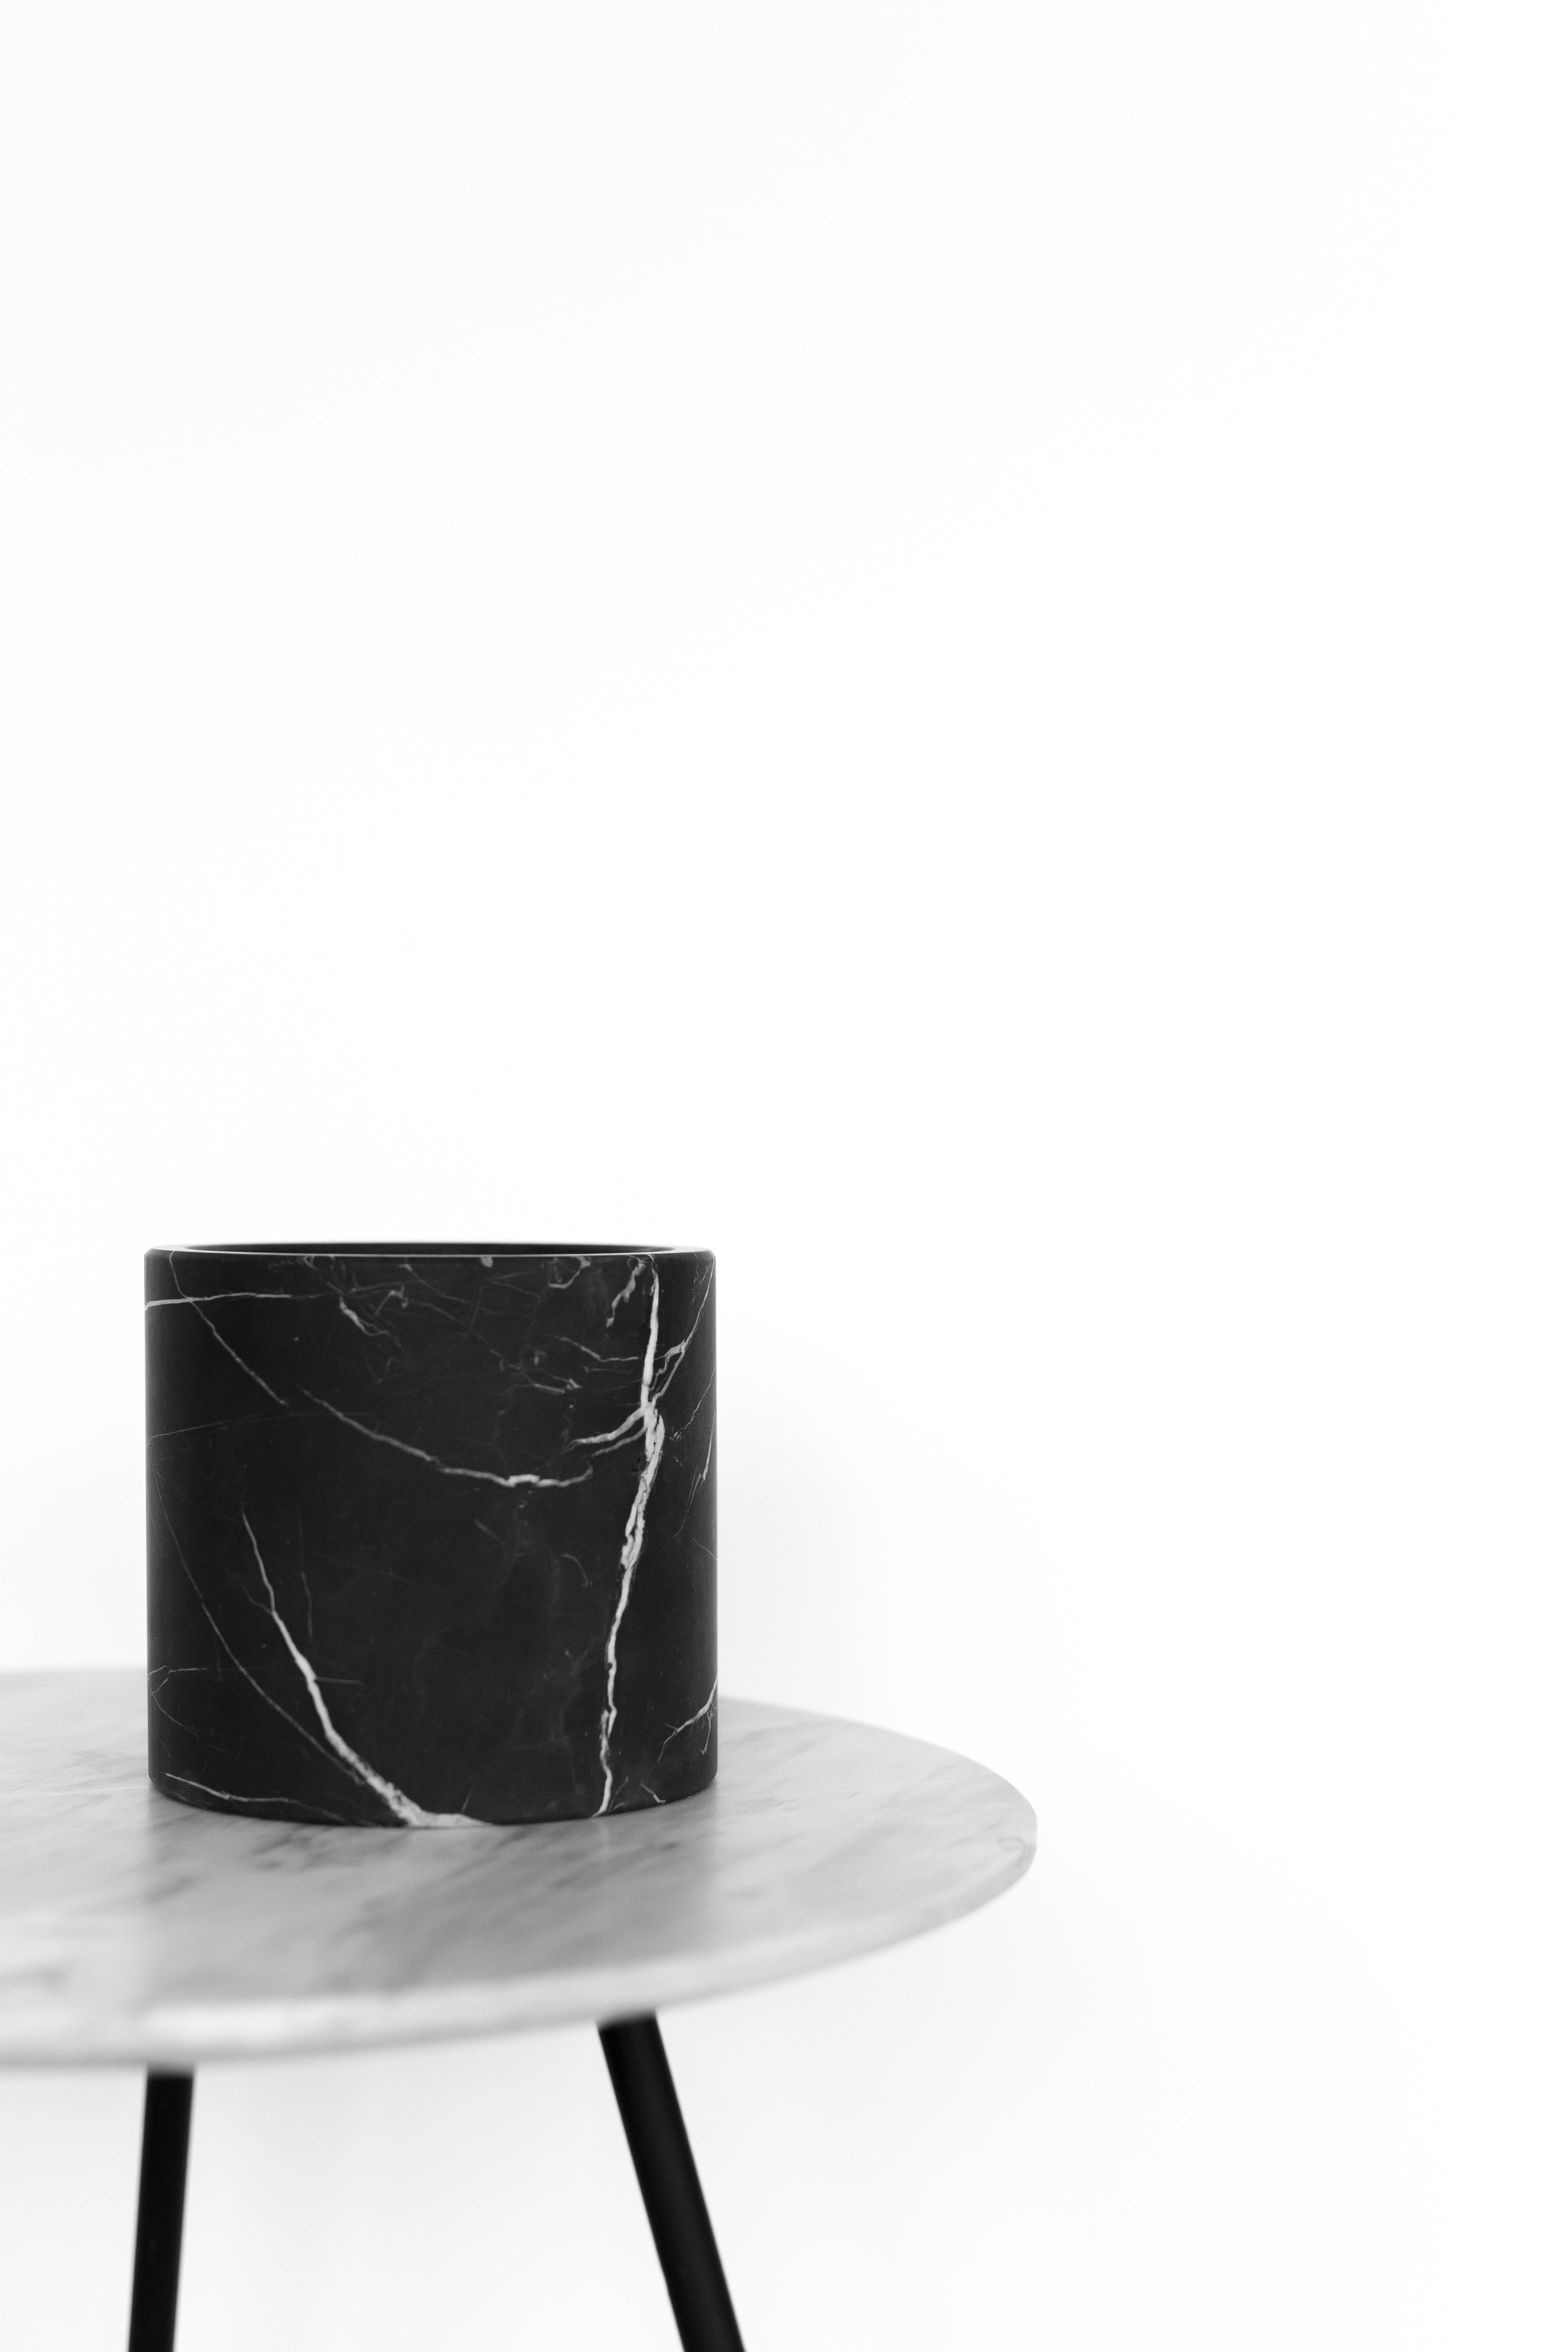 Plantpot in carved Monterrey black marble. Handmade in Mexico.  Production time: 6-8 weeks for items without marble / 13-14 weeks for marble pieces. Shipping +10 additional business days. Casa Quieta uses natural materials such as woods, stones,